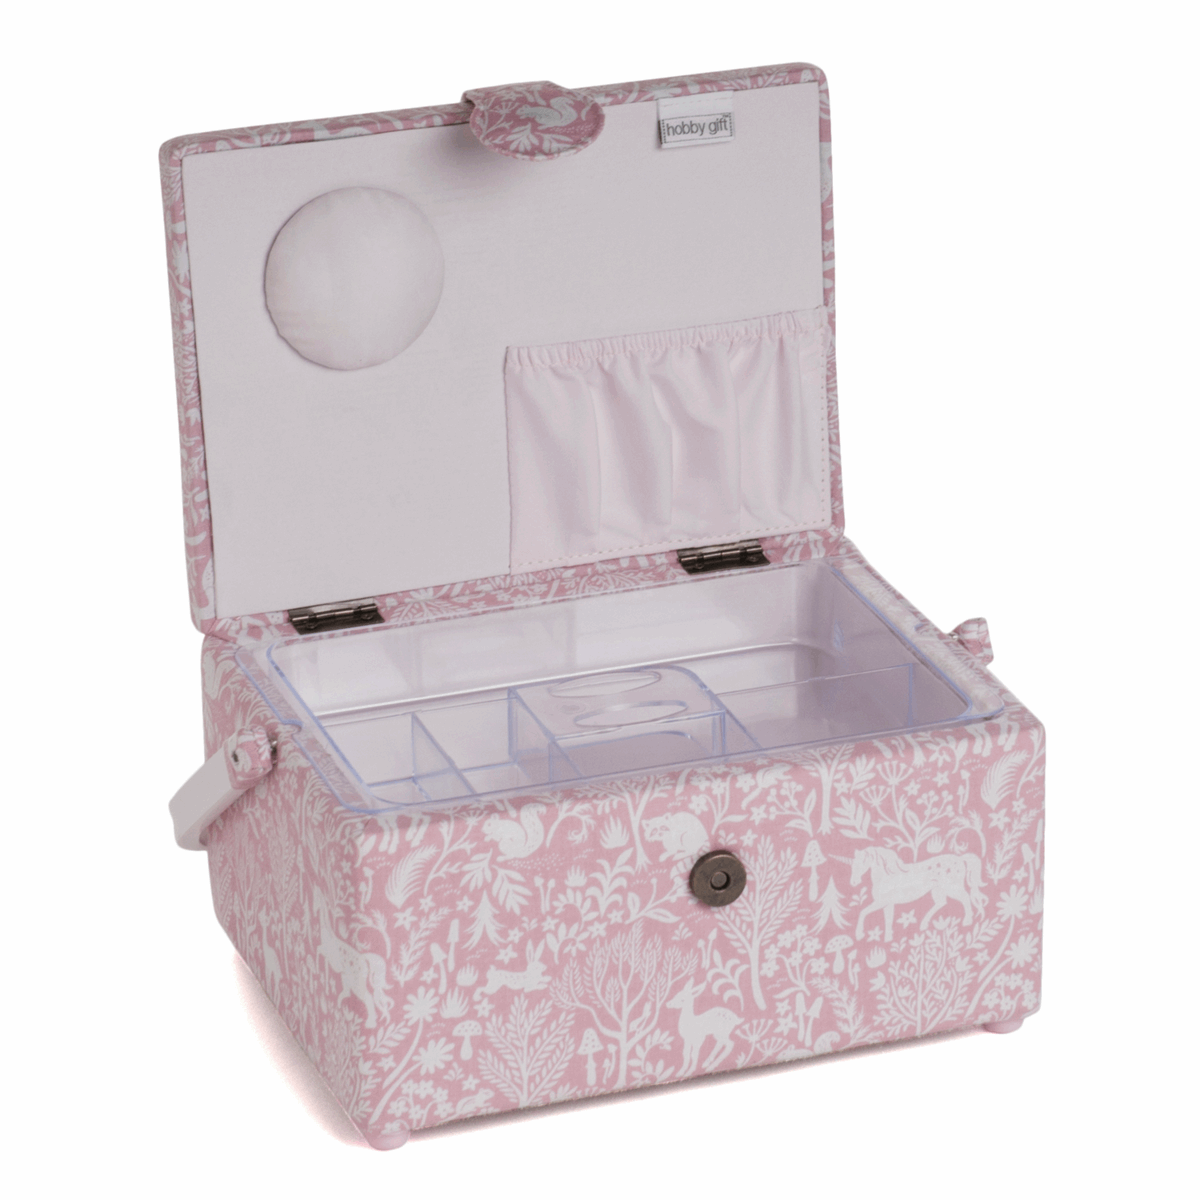 Forest Frolic Sewing Box with Handle - Medium